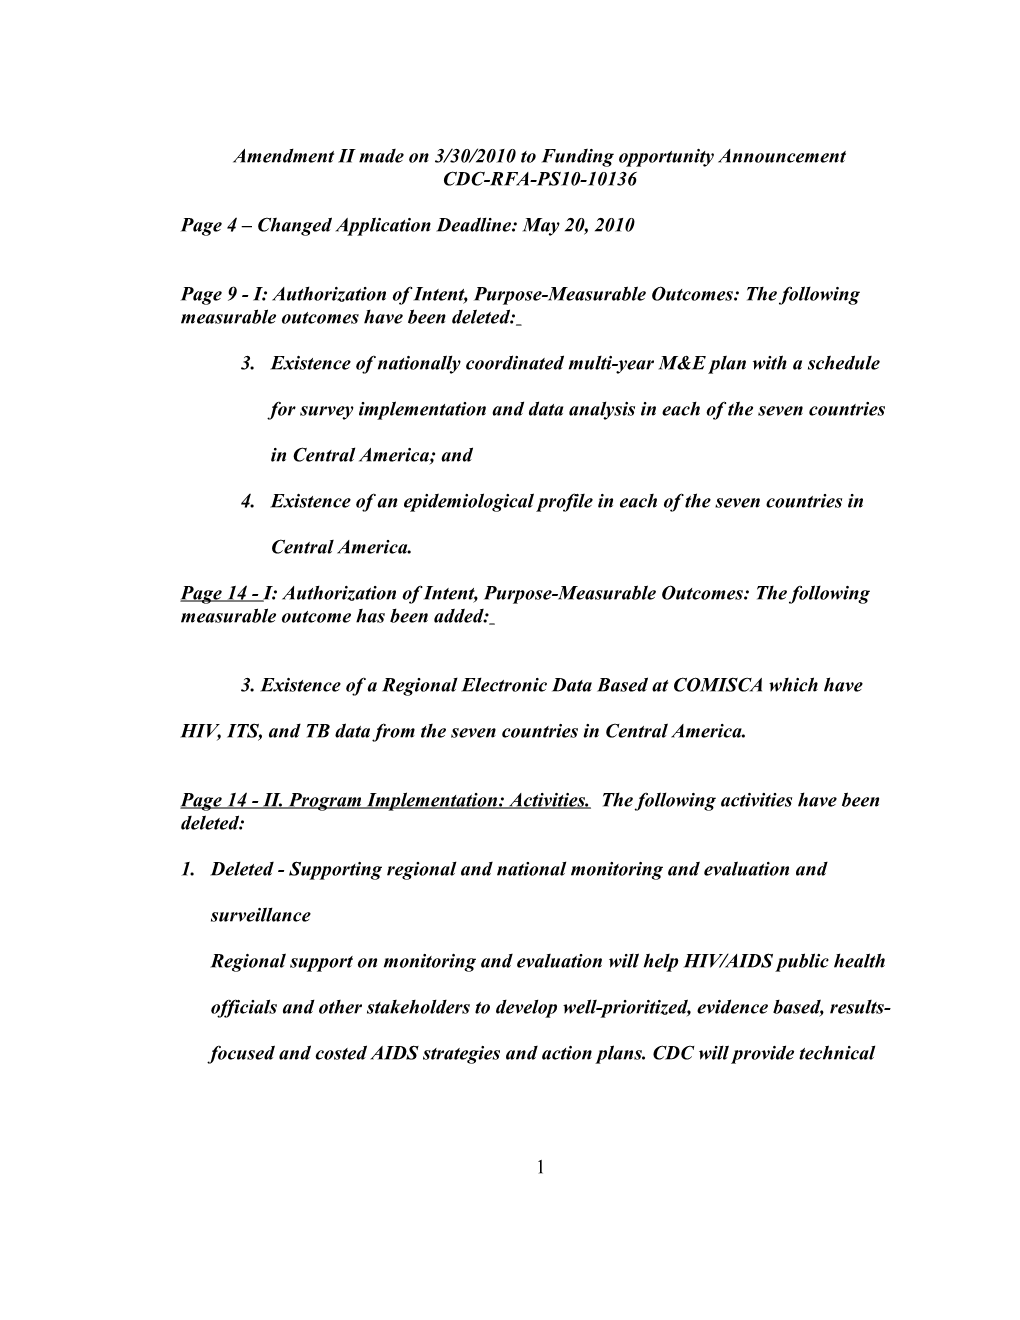 Amendment II Made on 3/30/2010 to Funding Opportunity Announcement